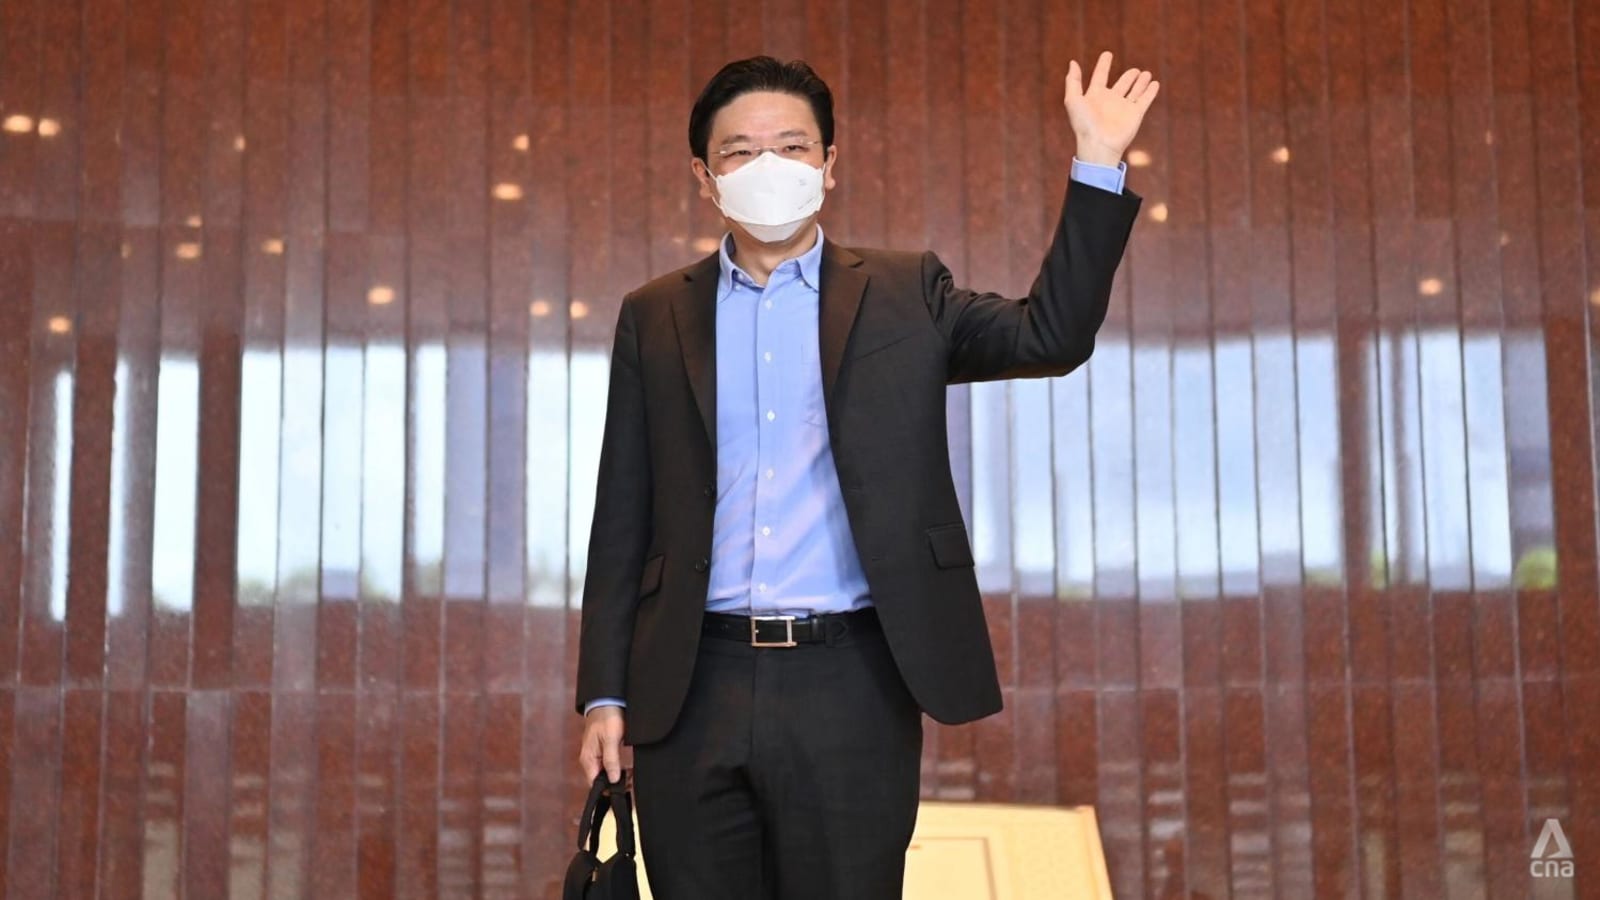 Lawrence Wong’s leadership amid COVID-19 pandemic helped elevate him to top post: Observers